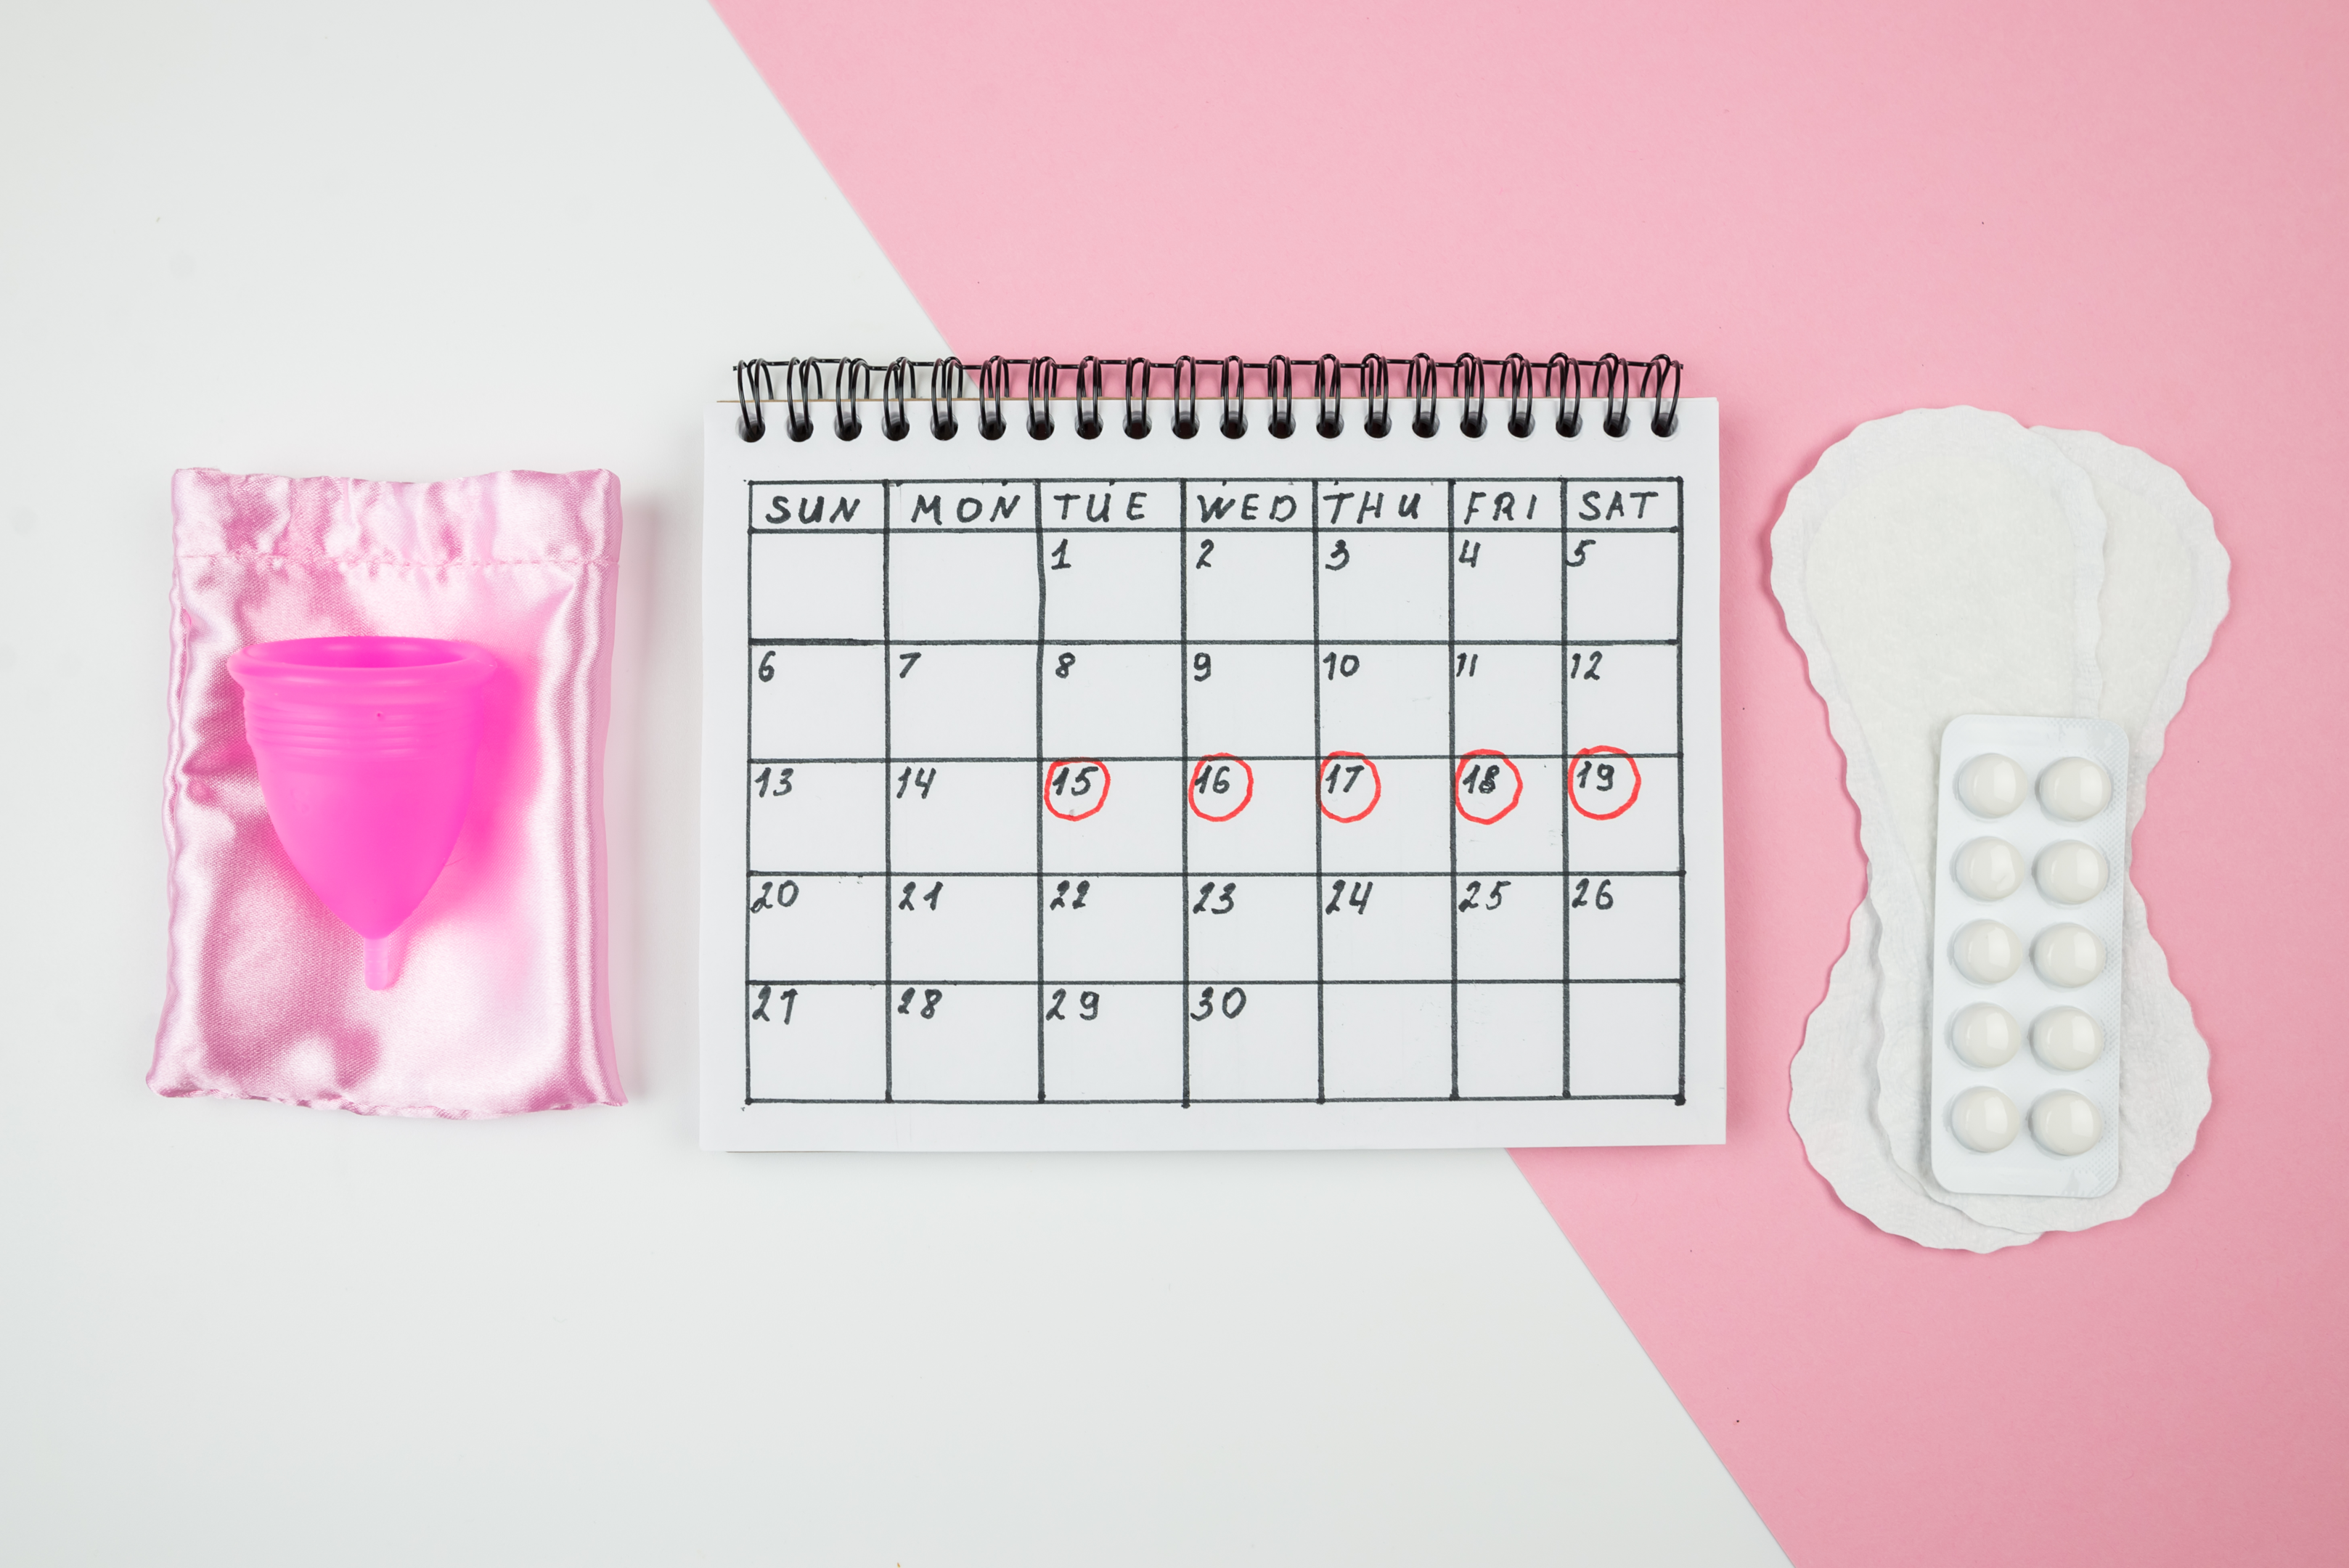 20 Signs Your Period is Coming (how to tell period symptoms)